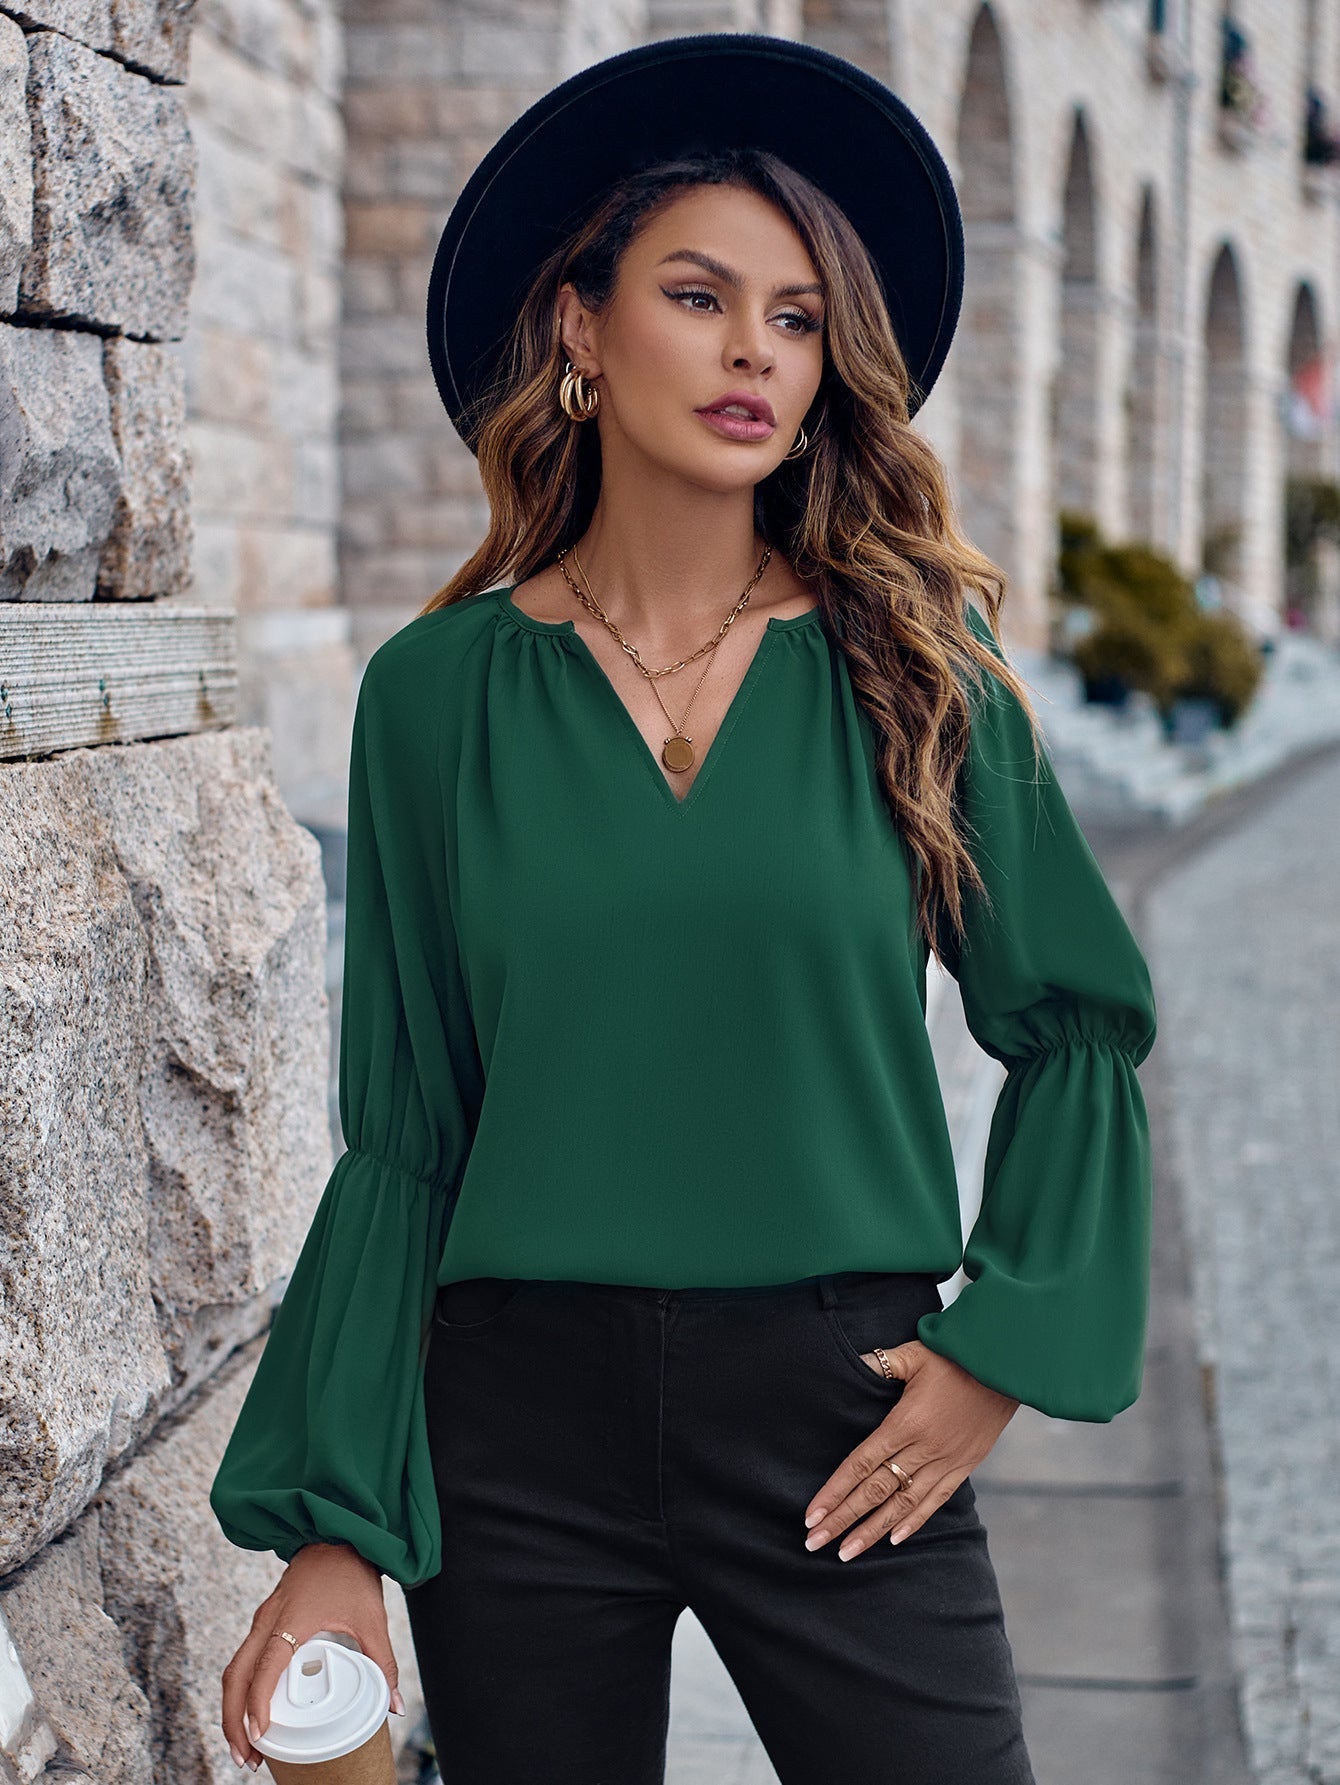 Women Clothing Solid Color V neck Loose Casual Autumn Winter Women Top